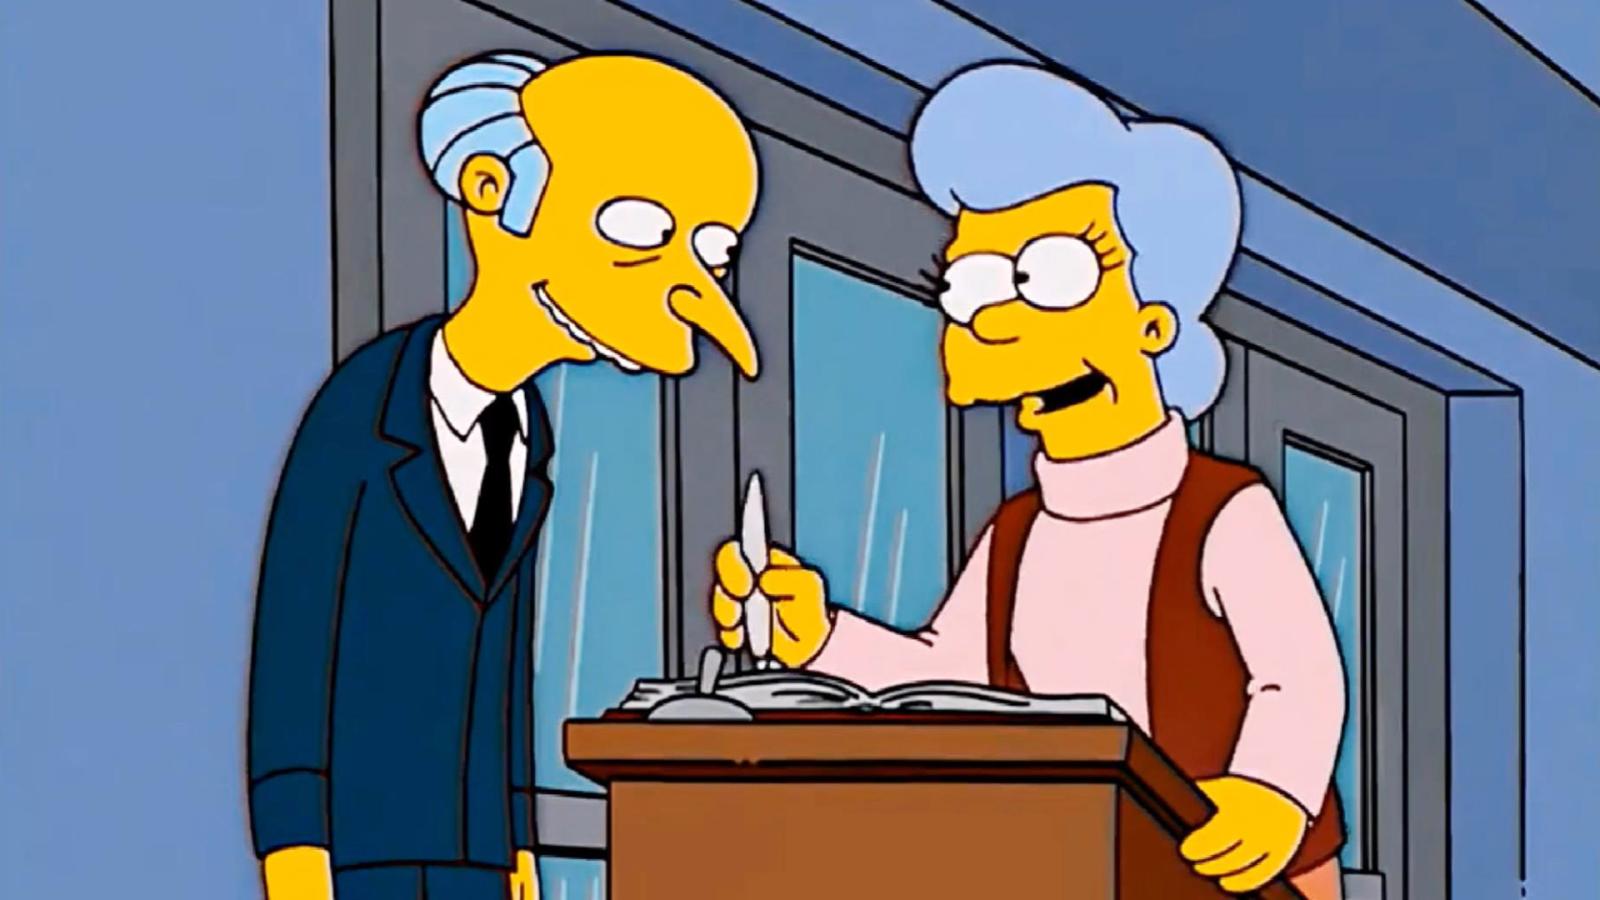 15 Most Unforgettable 'The Simpsons' Guest Stars - image 12